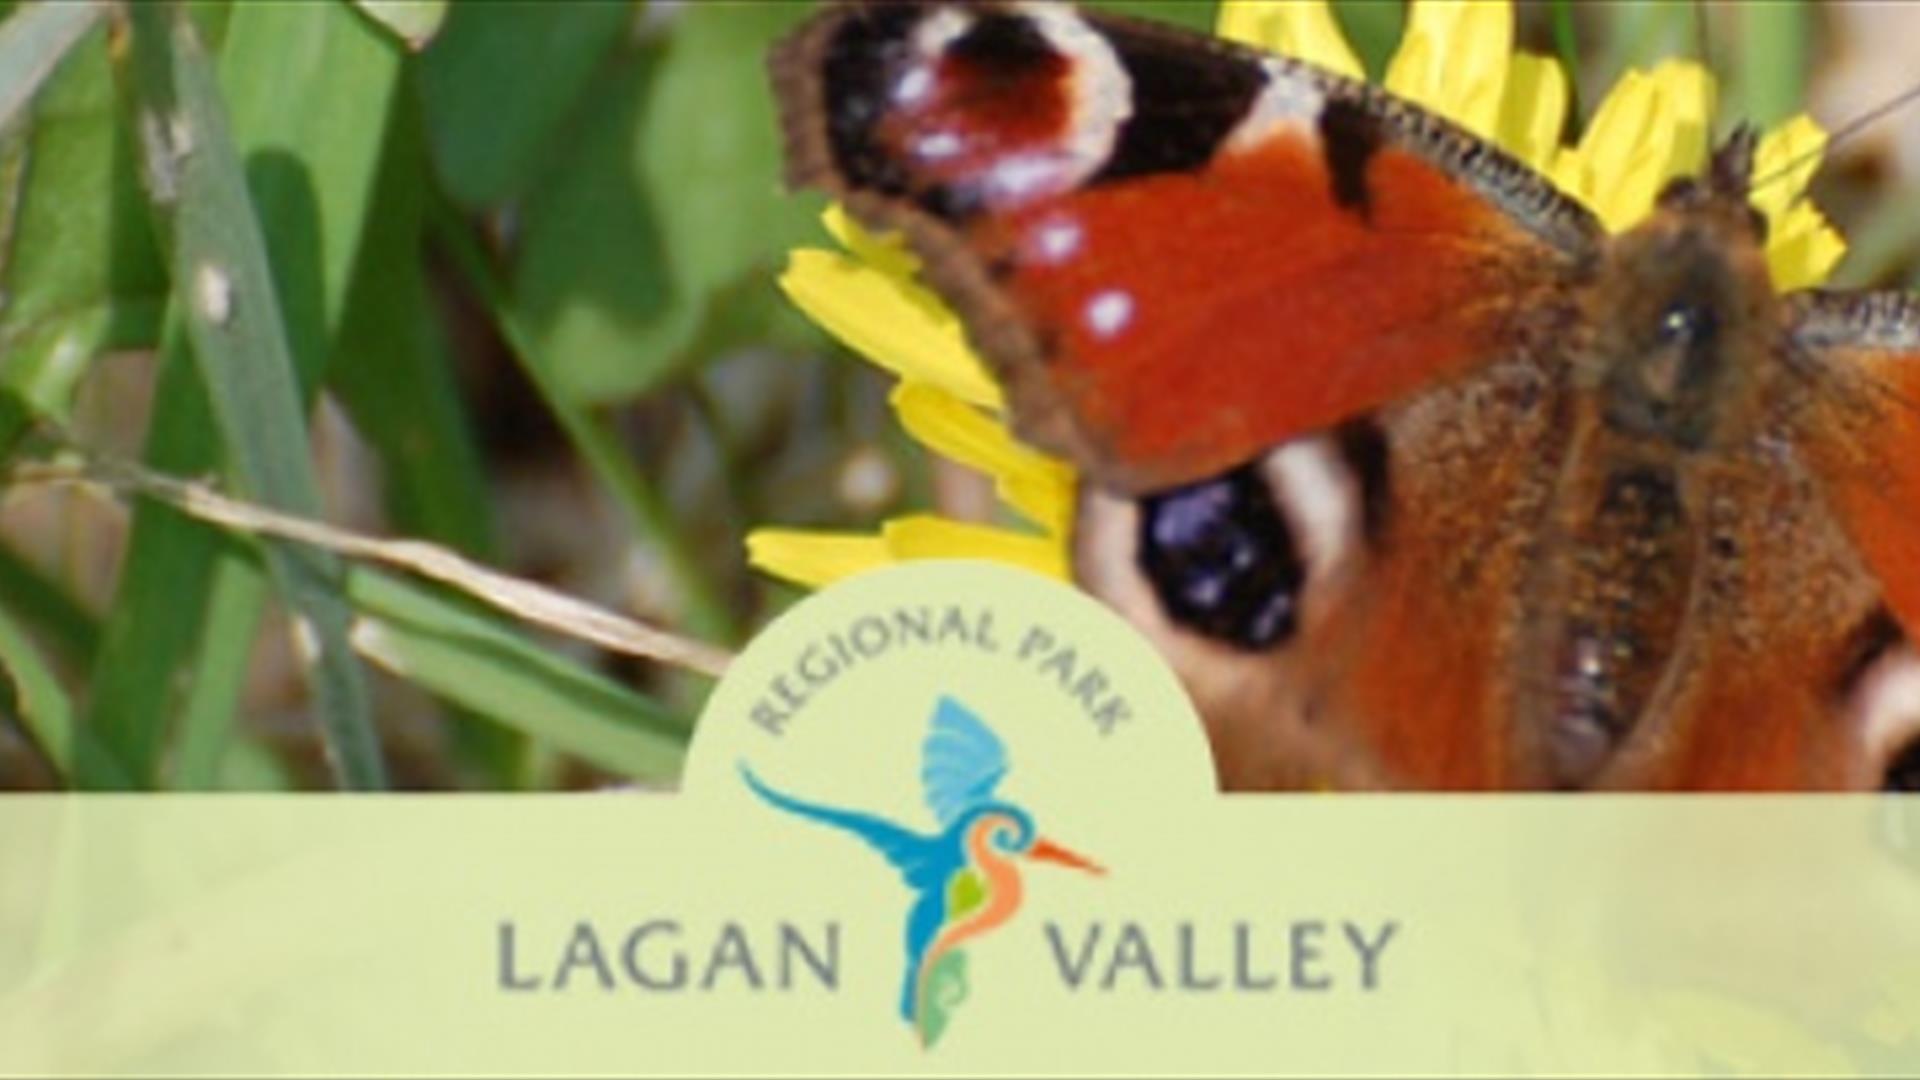 Logo for Lagan Valley Regional Park with butterfly and vegetation behind it